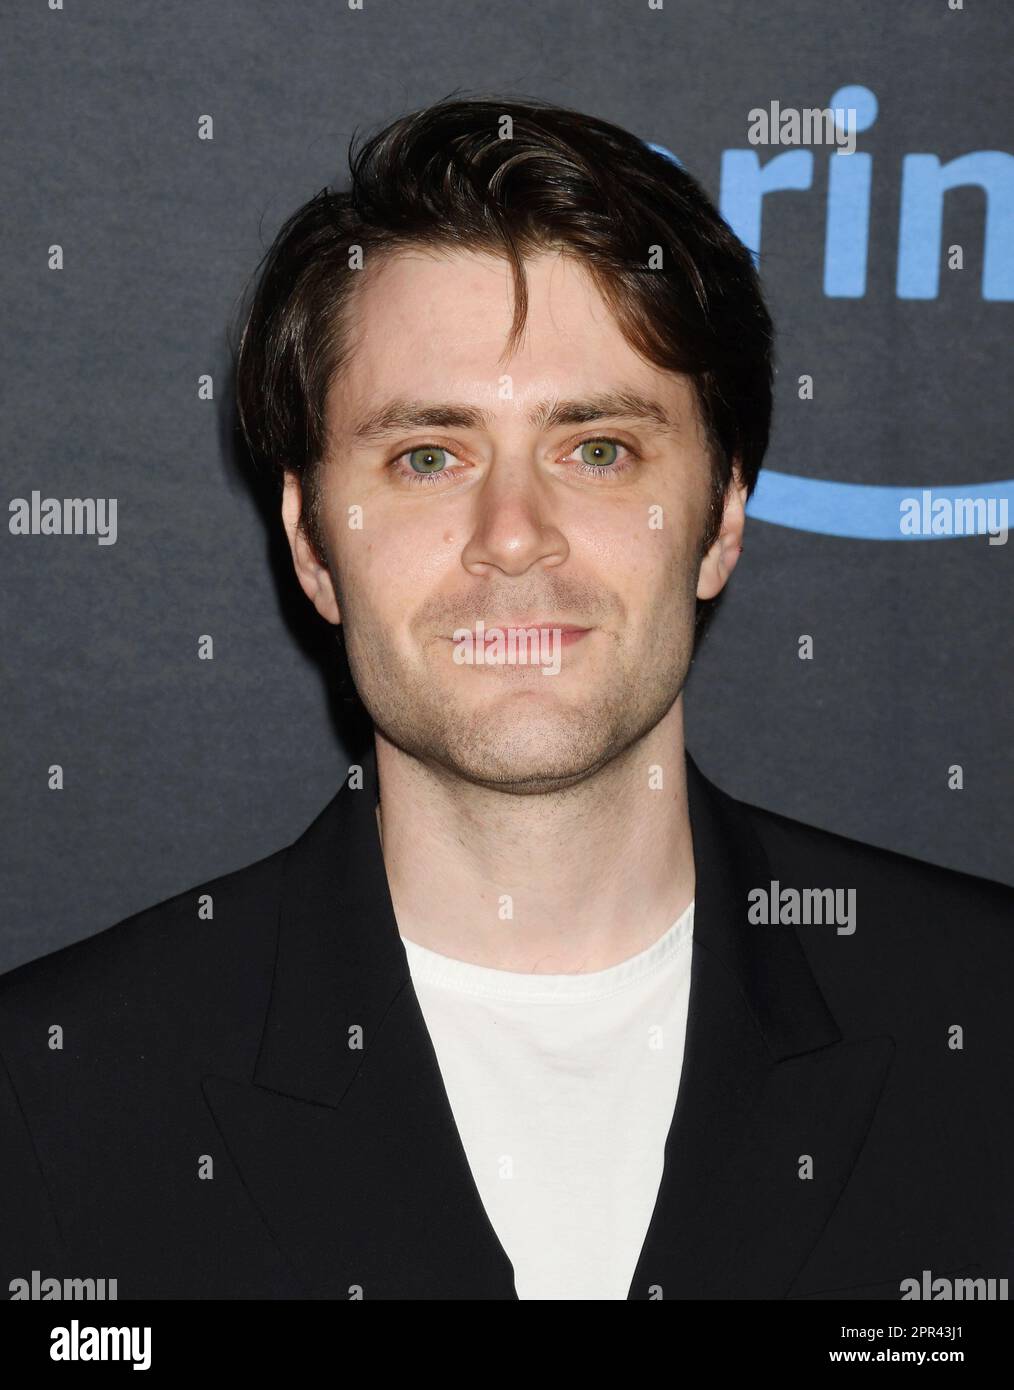 Culver City, California, USA. 25th Apr, 2023. David Weil attends the Los Angeles red carpet and fan screening for Prime Video's 'Citadel' at the Culver Theater on April 25, 2023 in Los Angeles, California. Credit: Jeffrey Mayer/Jtm Photos/Media Punch/Alamy Live News Stock Photo